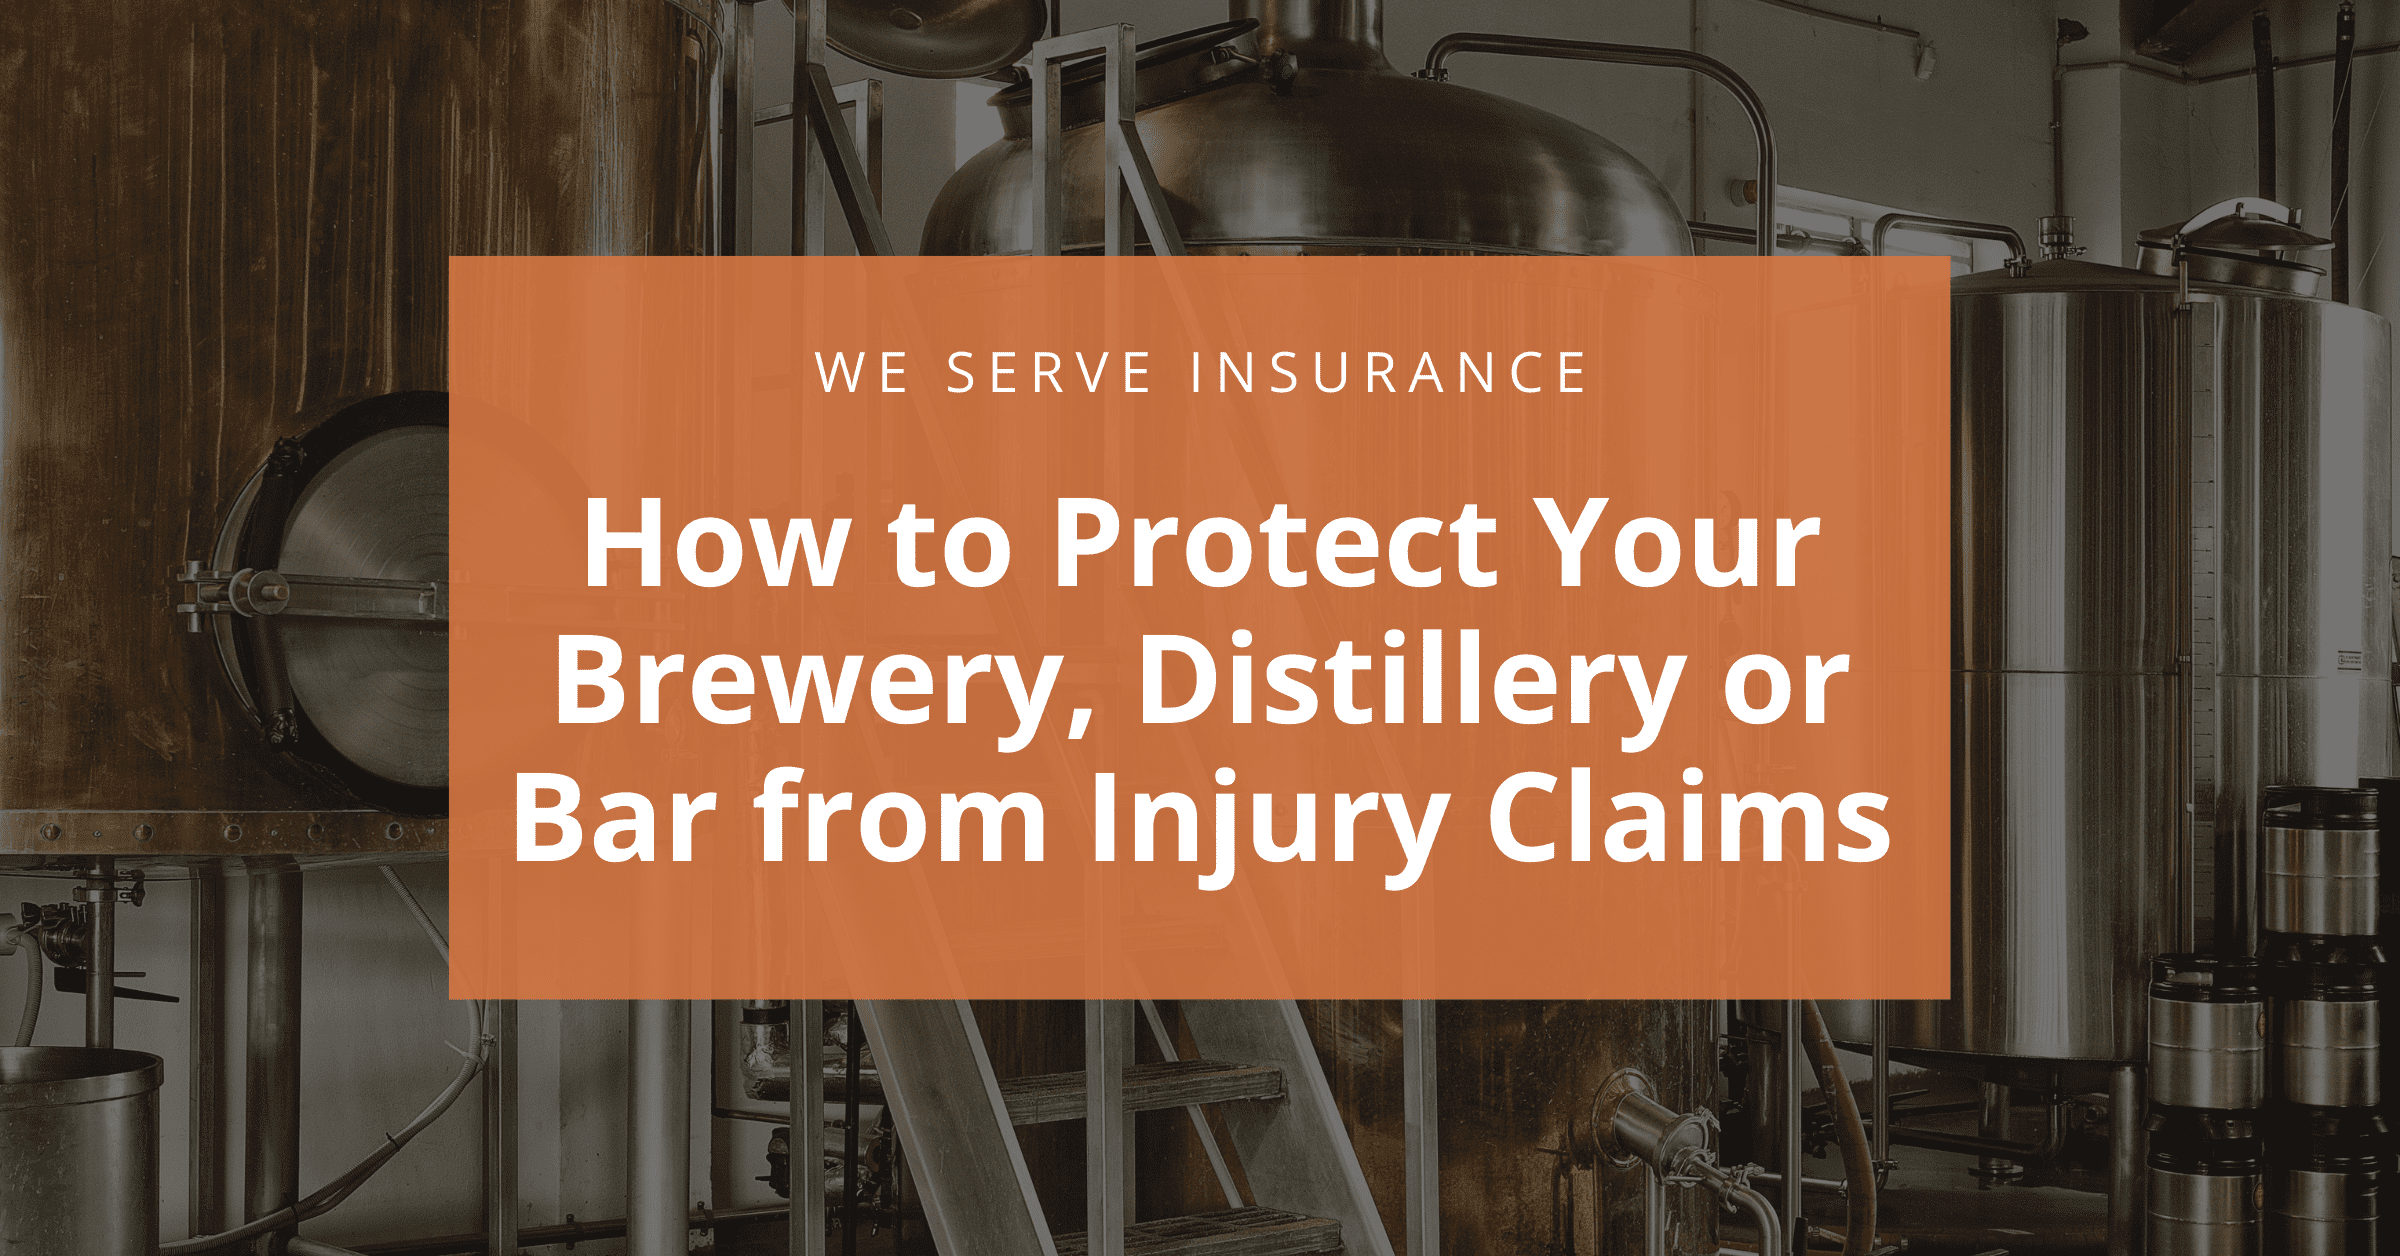 Protect Brewery from Injury Claims